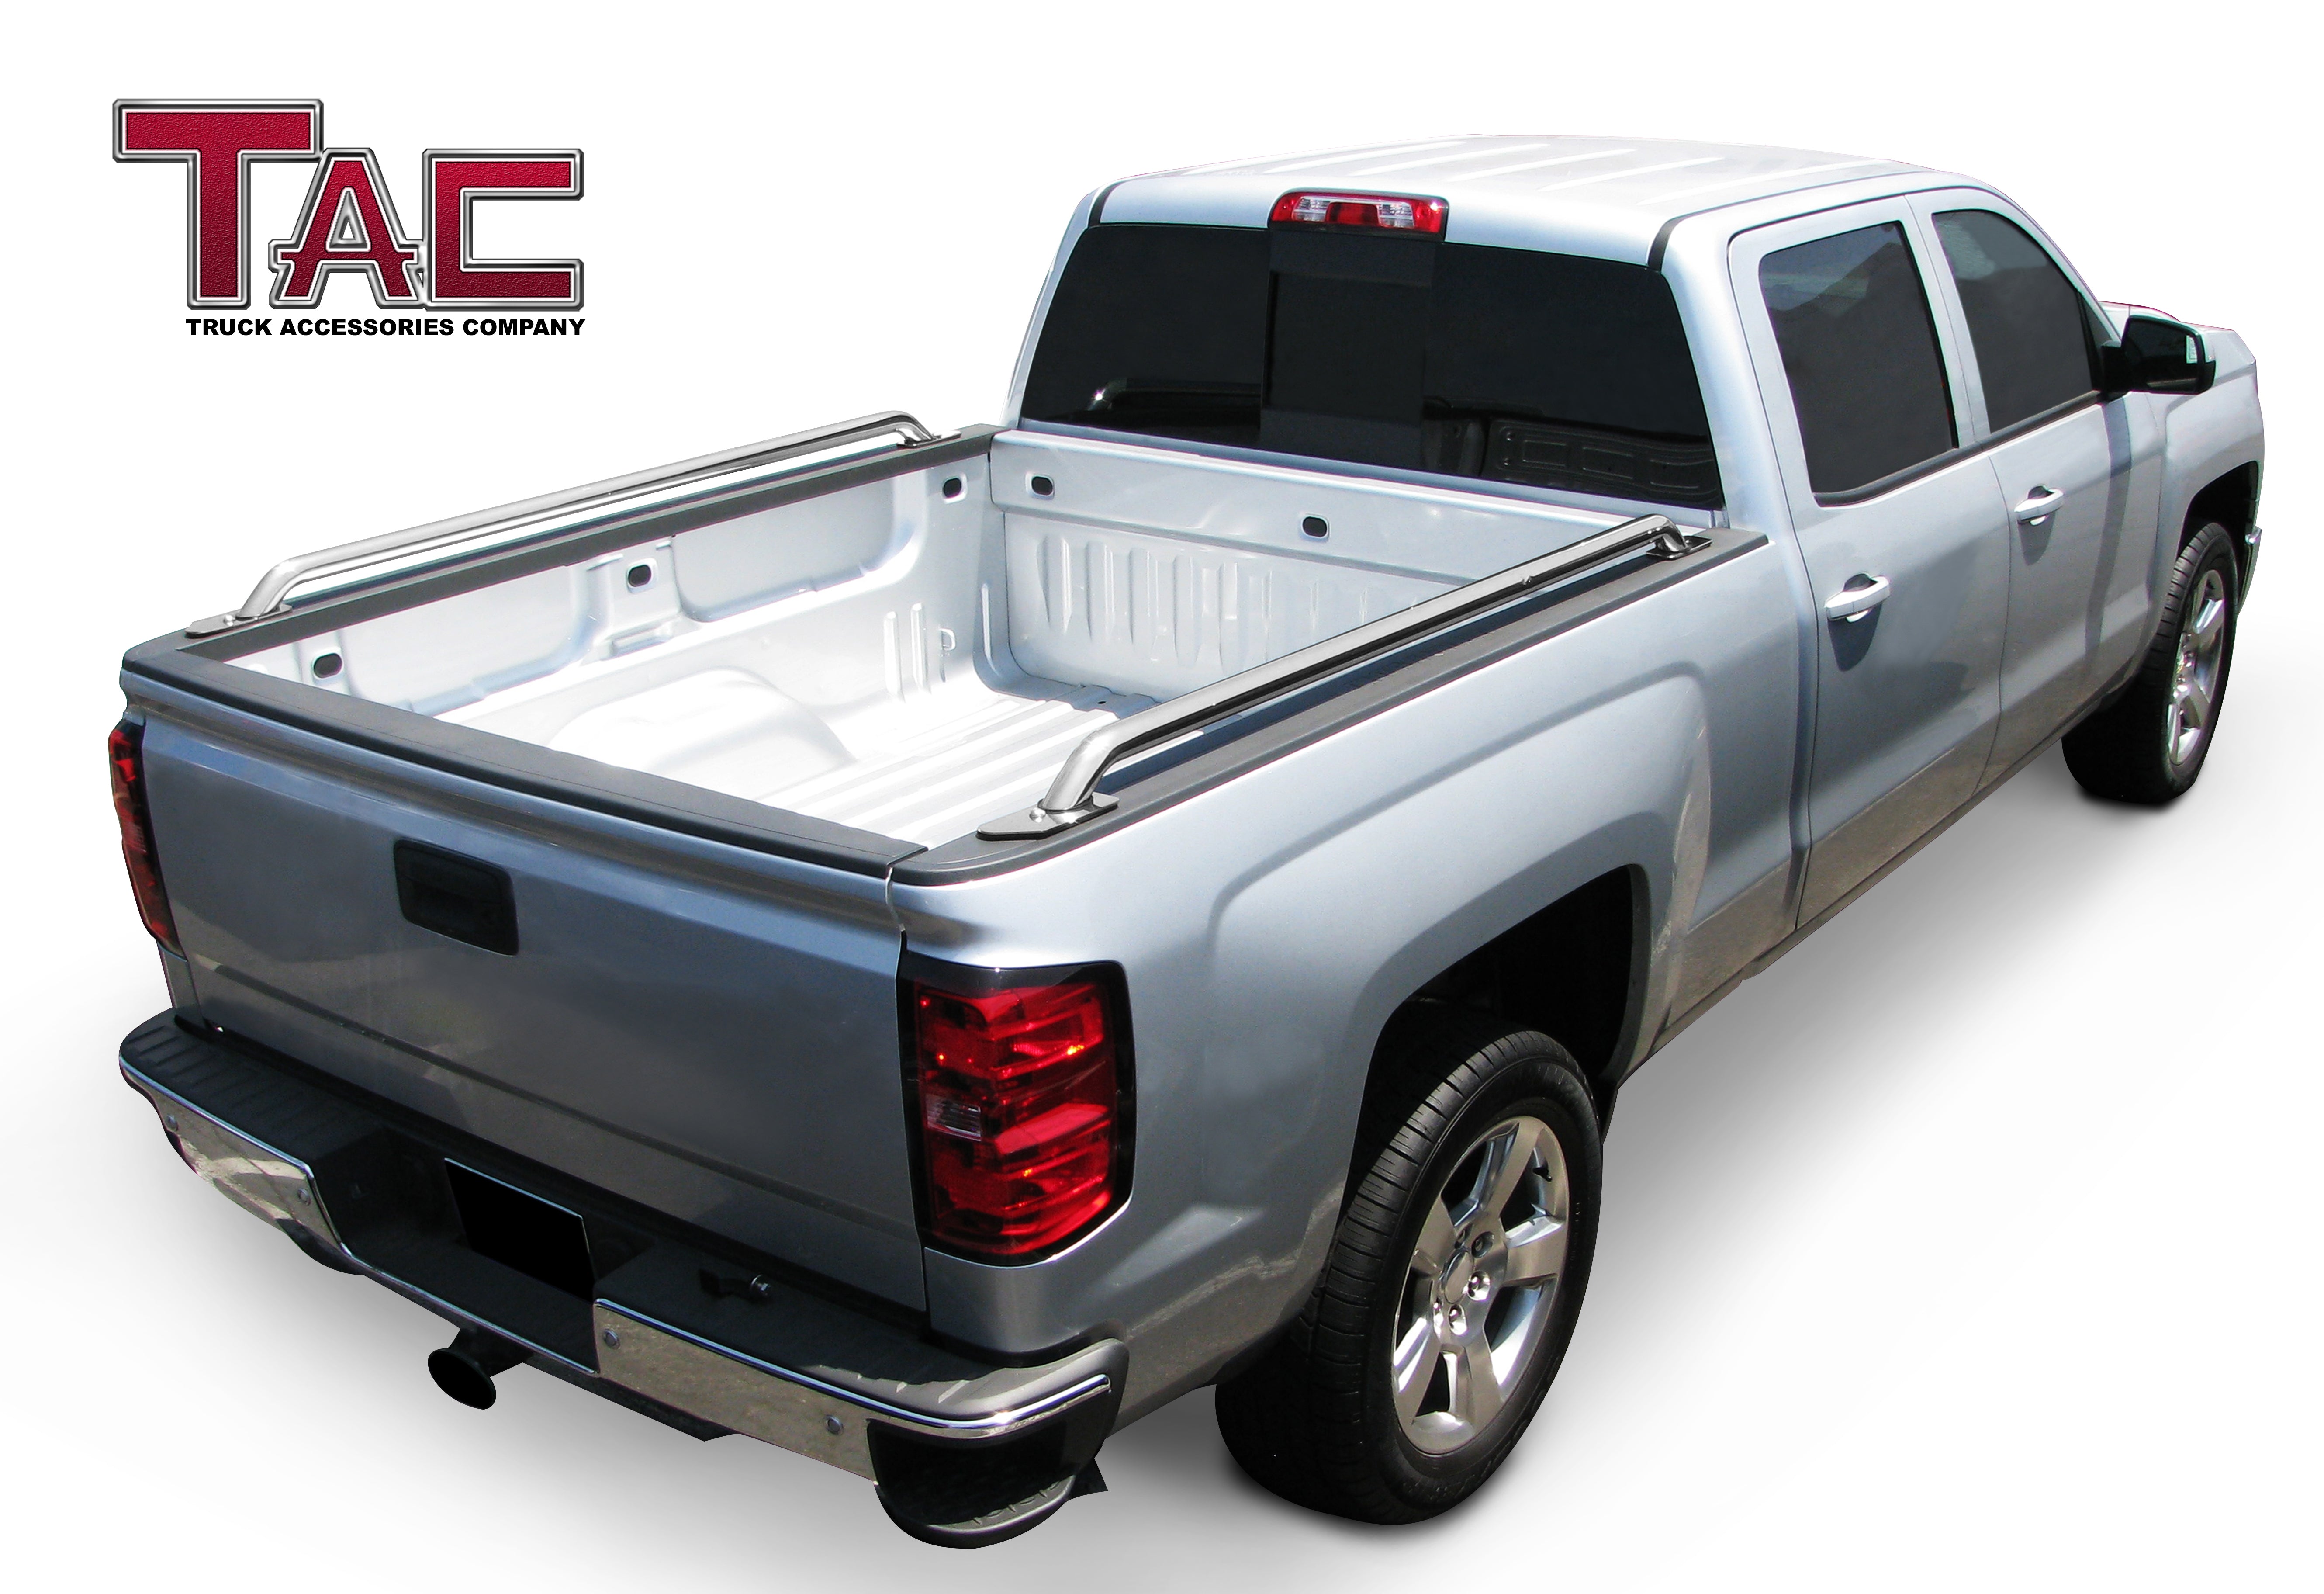 TAC Bed Rails Compatible with 1999-2016 Ford F250/F350/F450/550 Super Duty 6.5' Standard Bed 304 Stainless Steel Truck Side Rails -1 Pair - 0